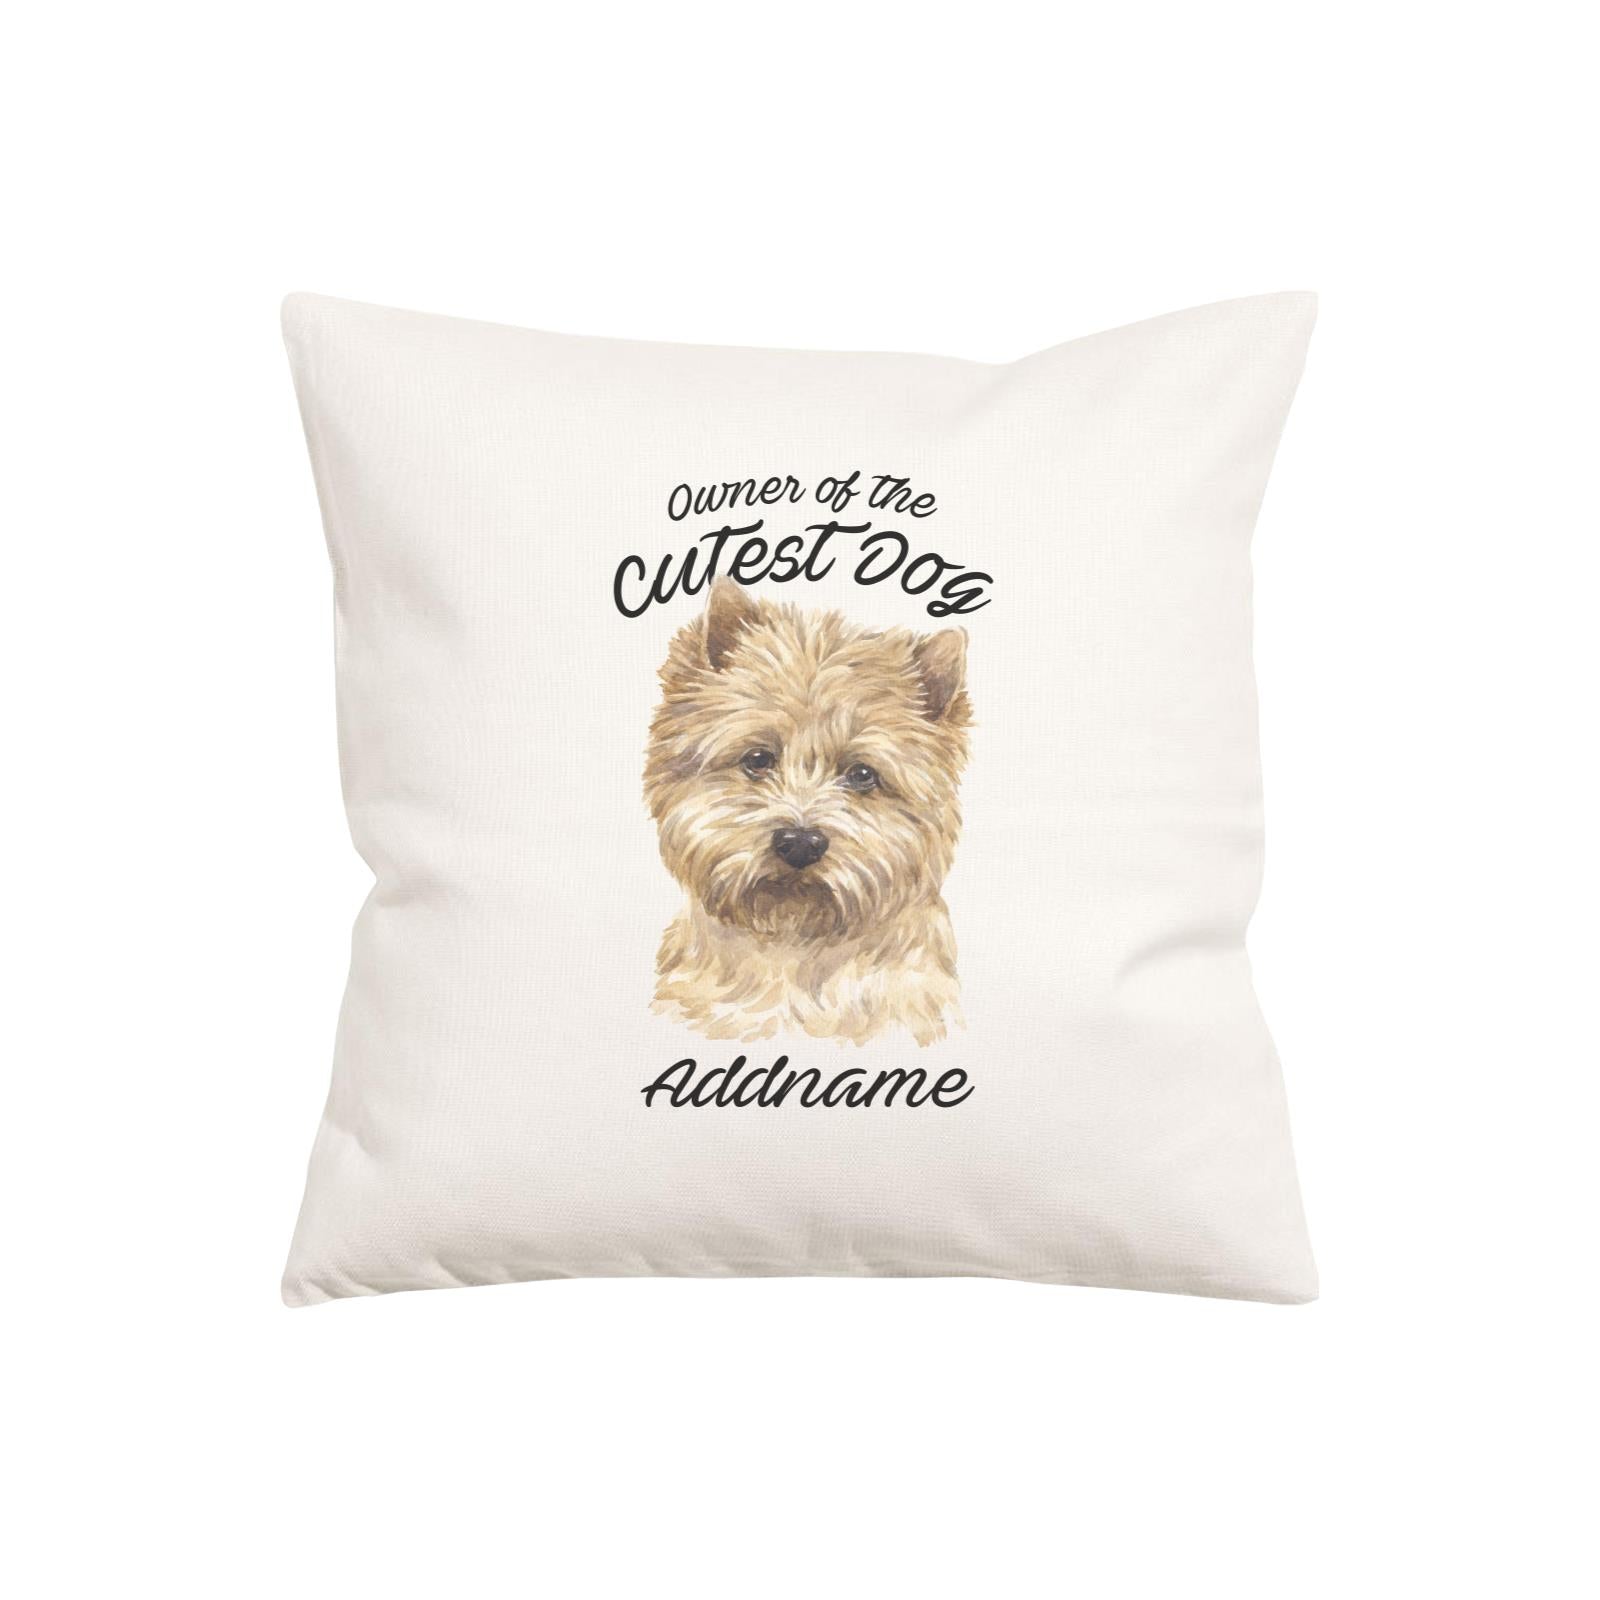 Watercolor Dog Owner Of The Cutest Dog Cairn Terrier Addname Pillow Cushion